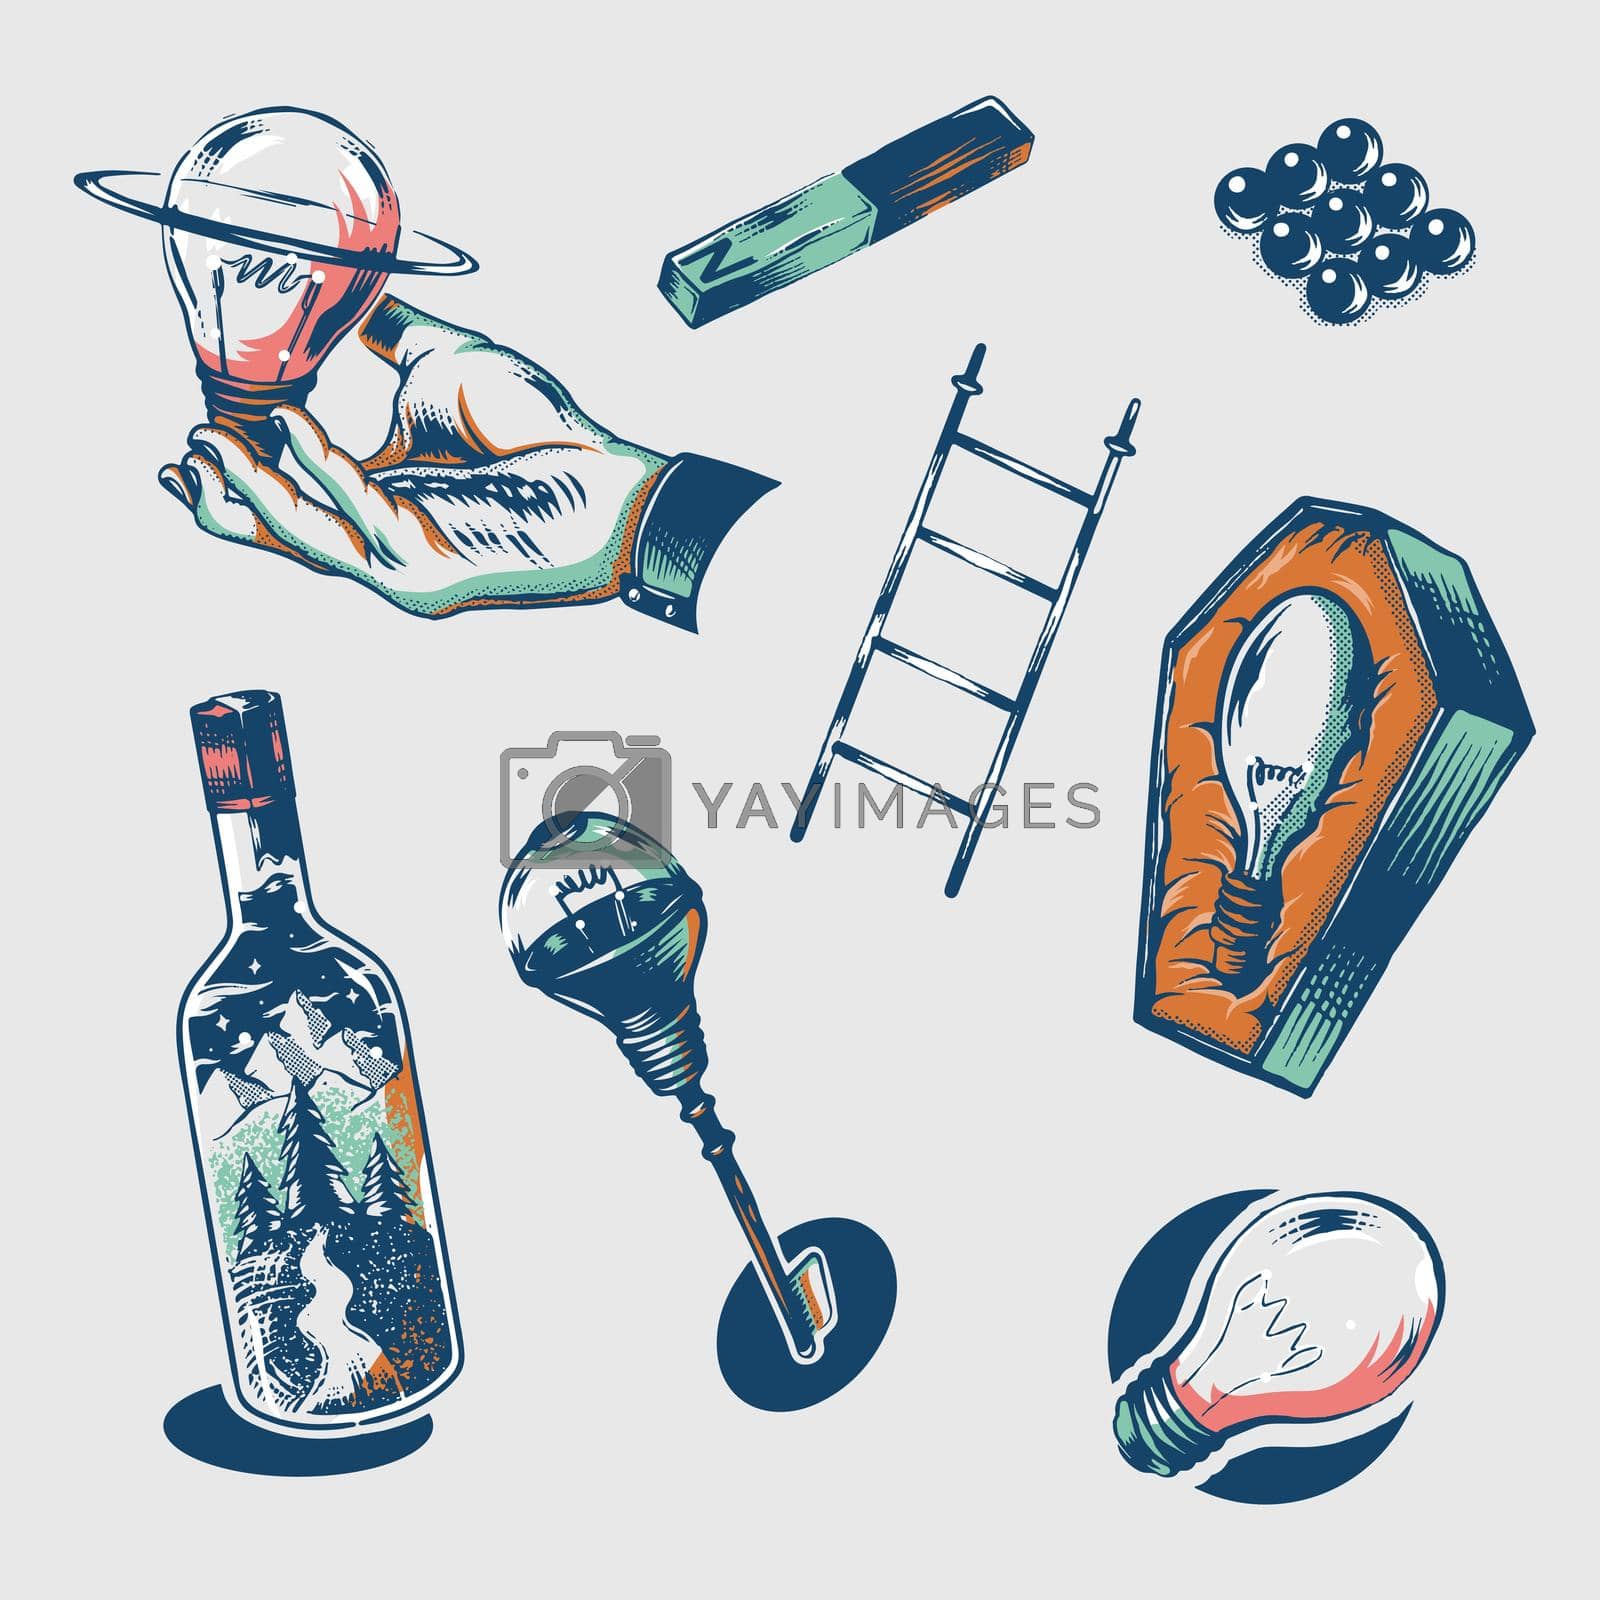 Creative thinking and new ideas concept vector